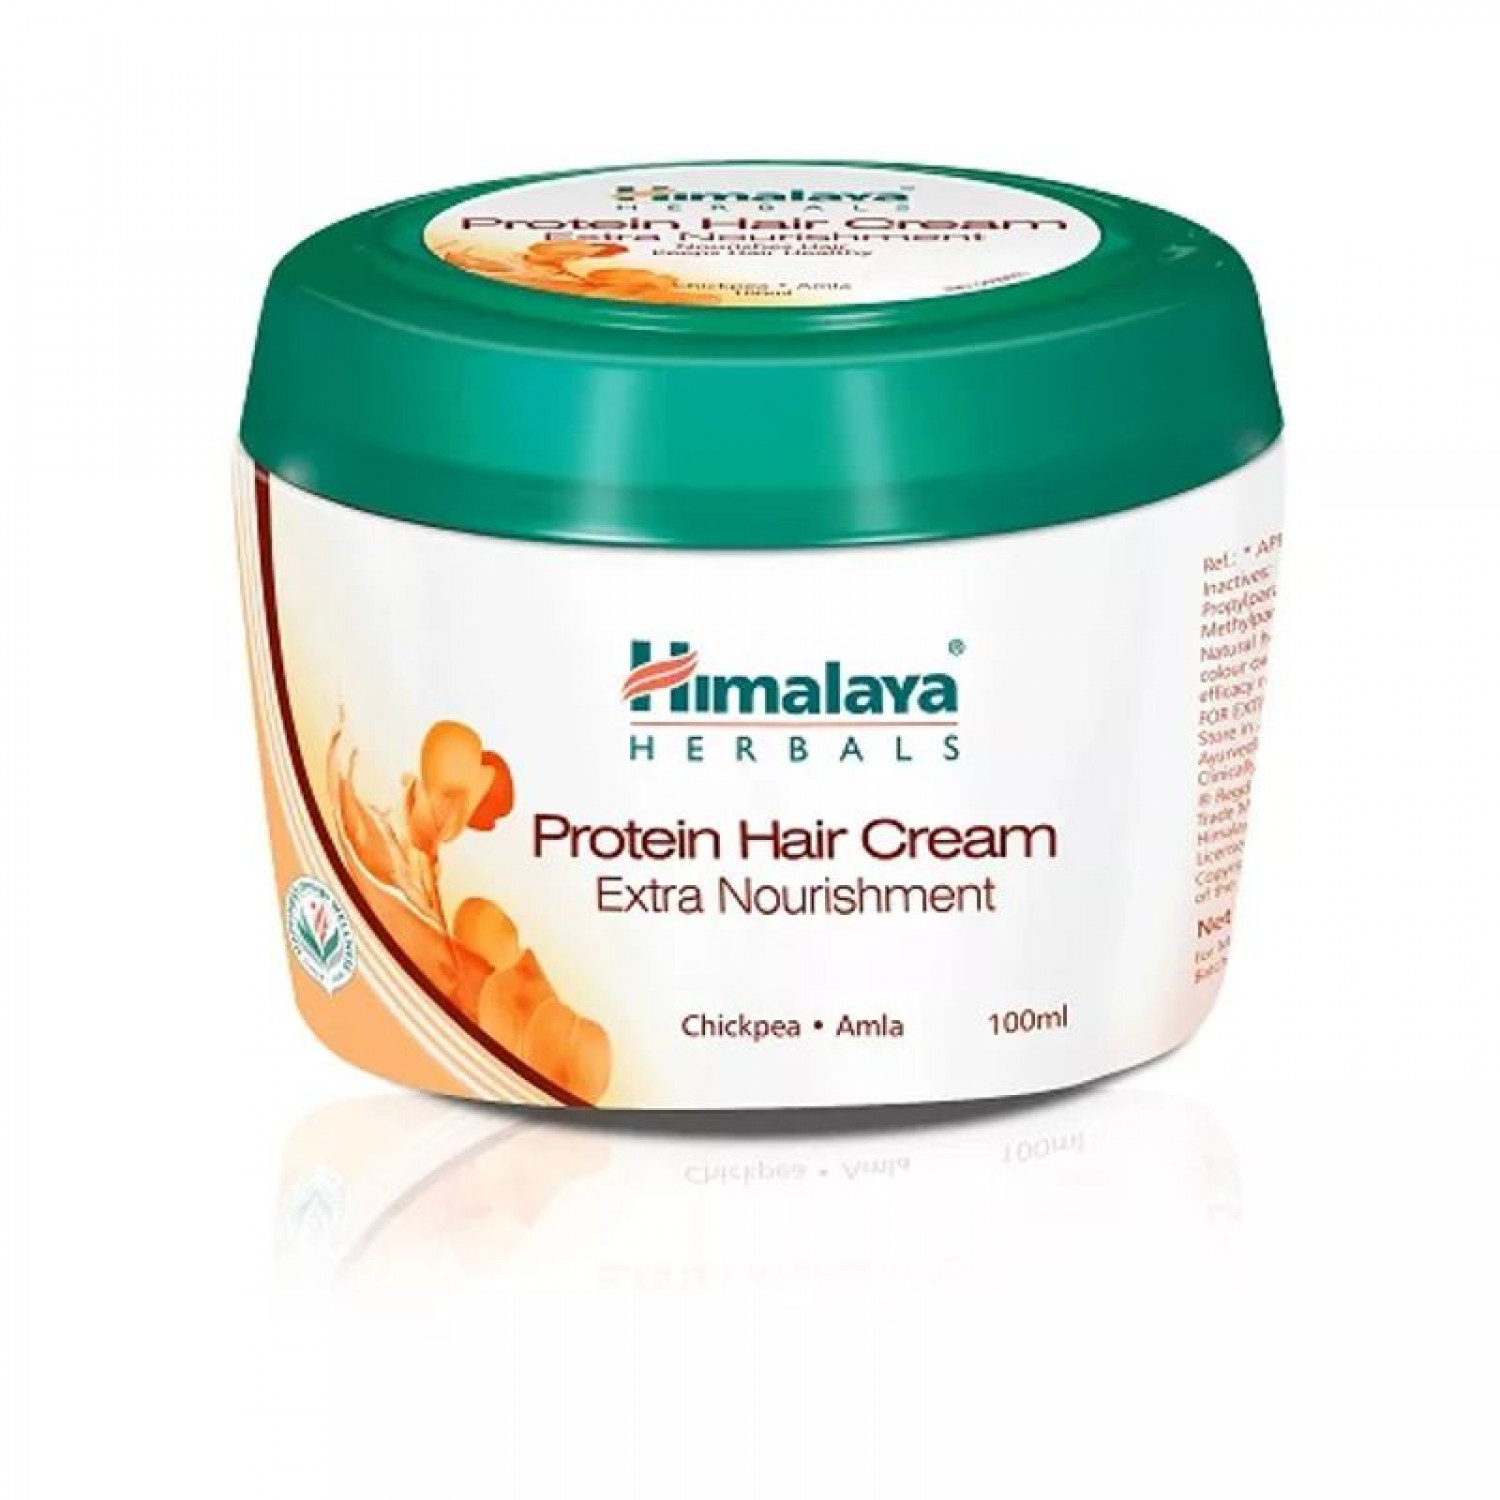 Himalaya Herbals Protein Hair Cream (Pack Of 2) (100ml Each) Infographic